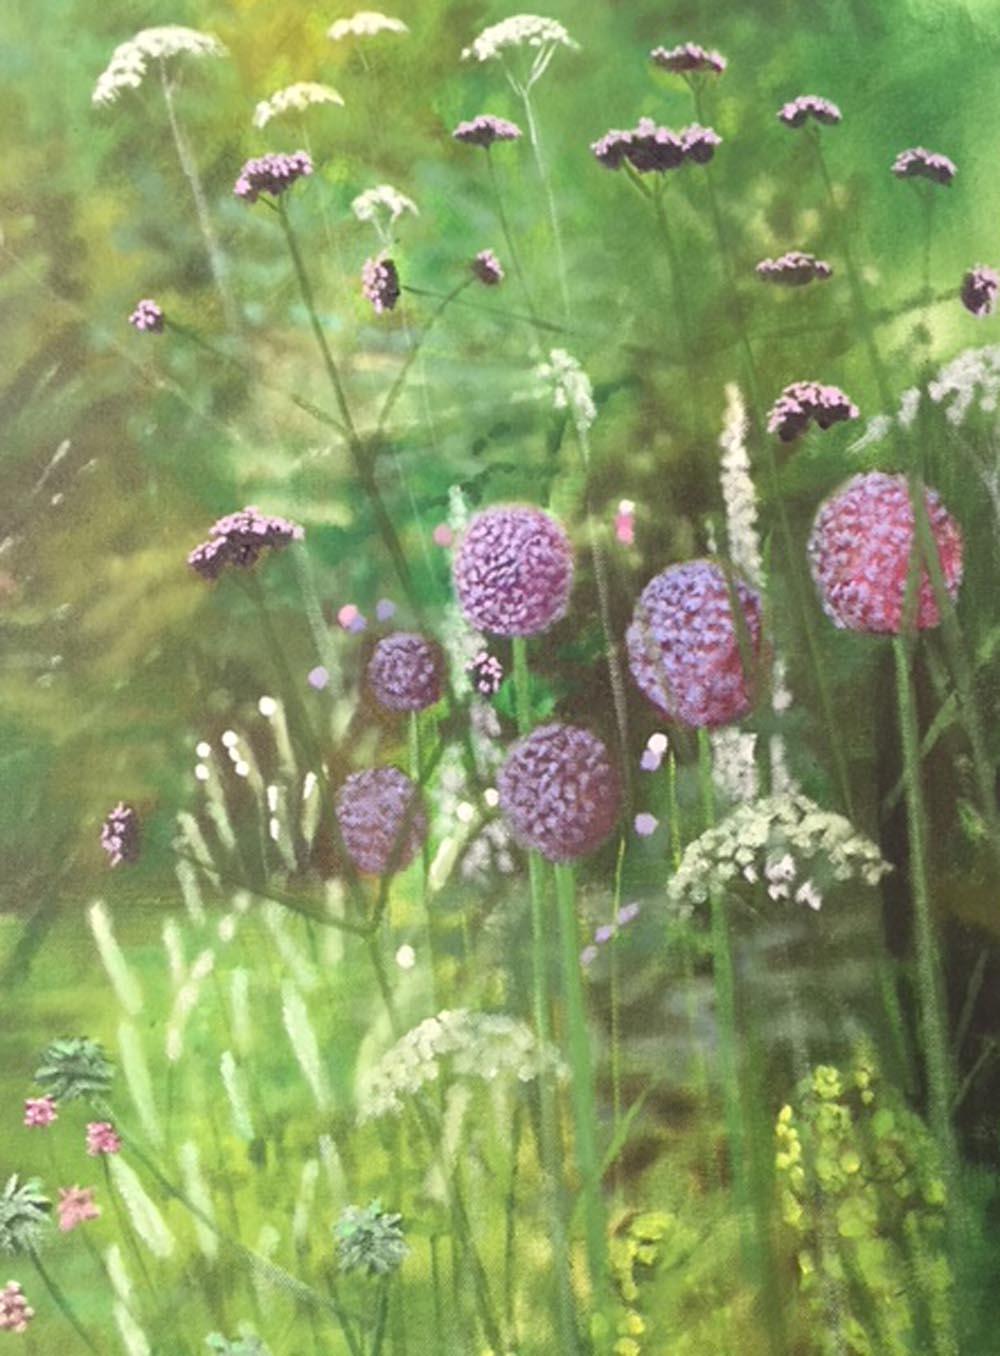 Dorset Garden X, flowers, realist painting for sale, oil on canvas  - Painting by Dylan Lloyd